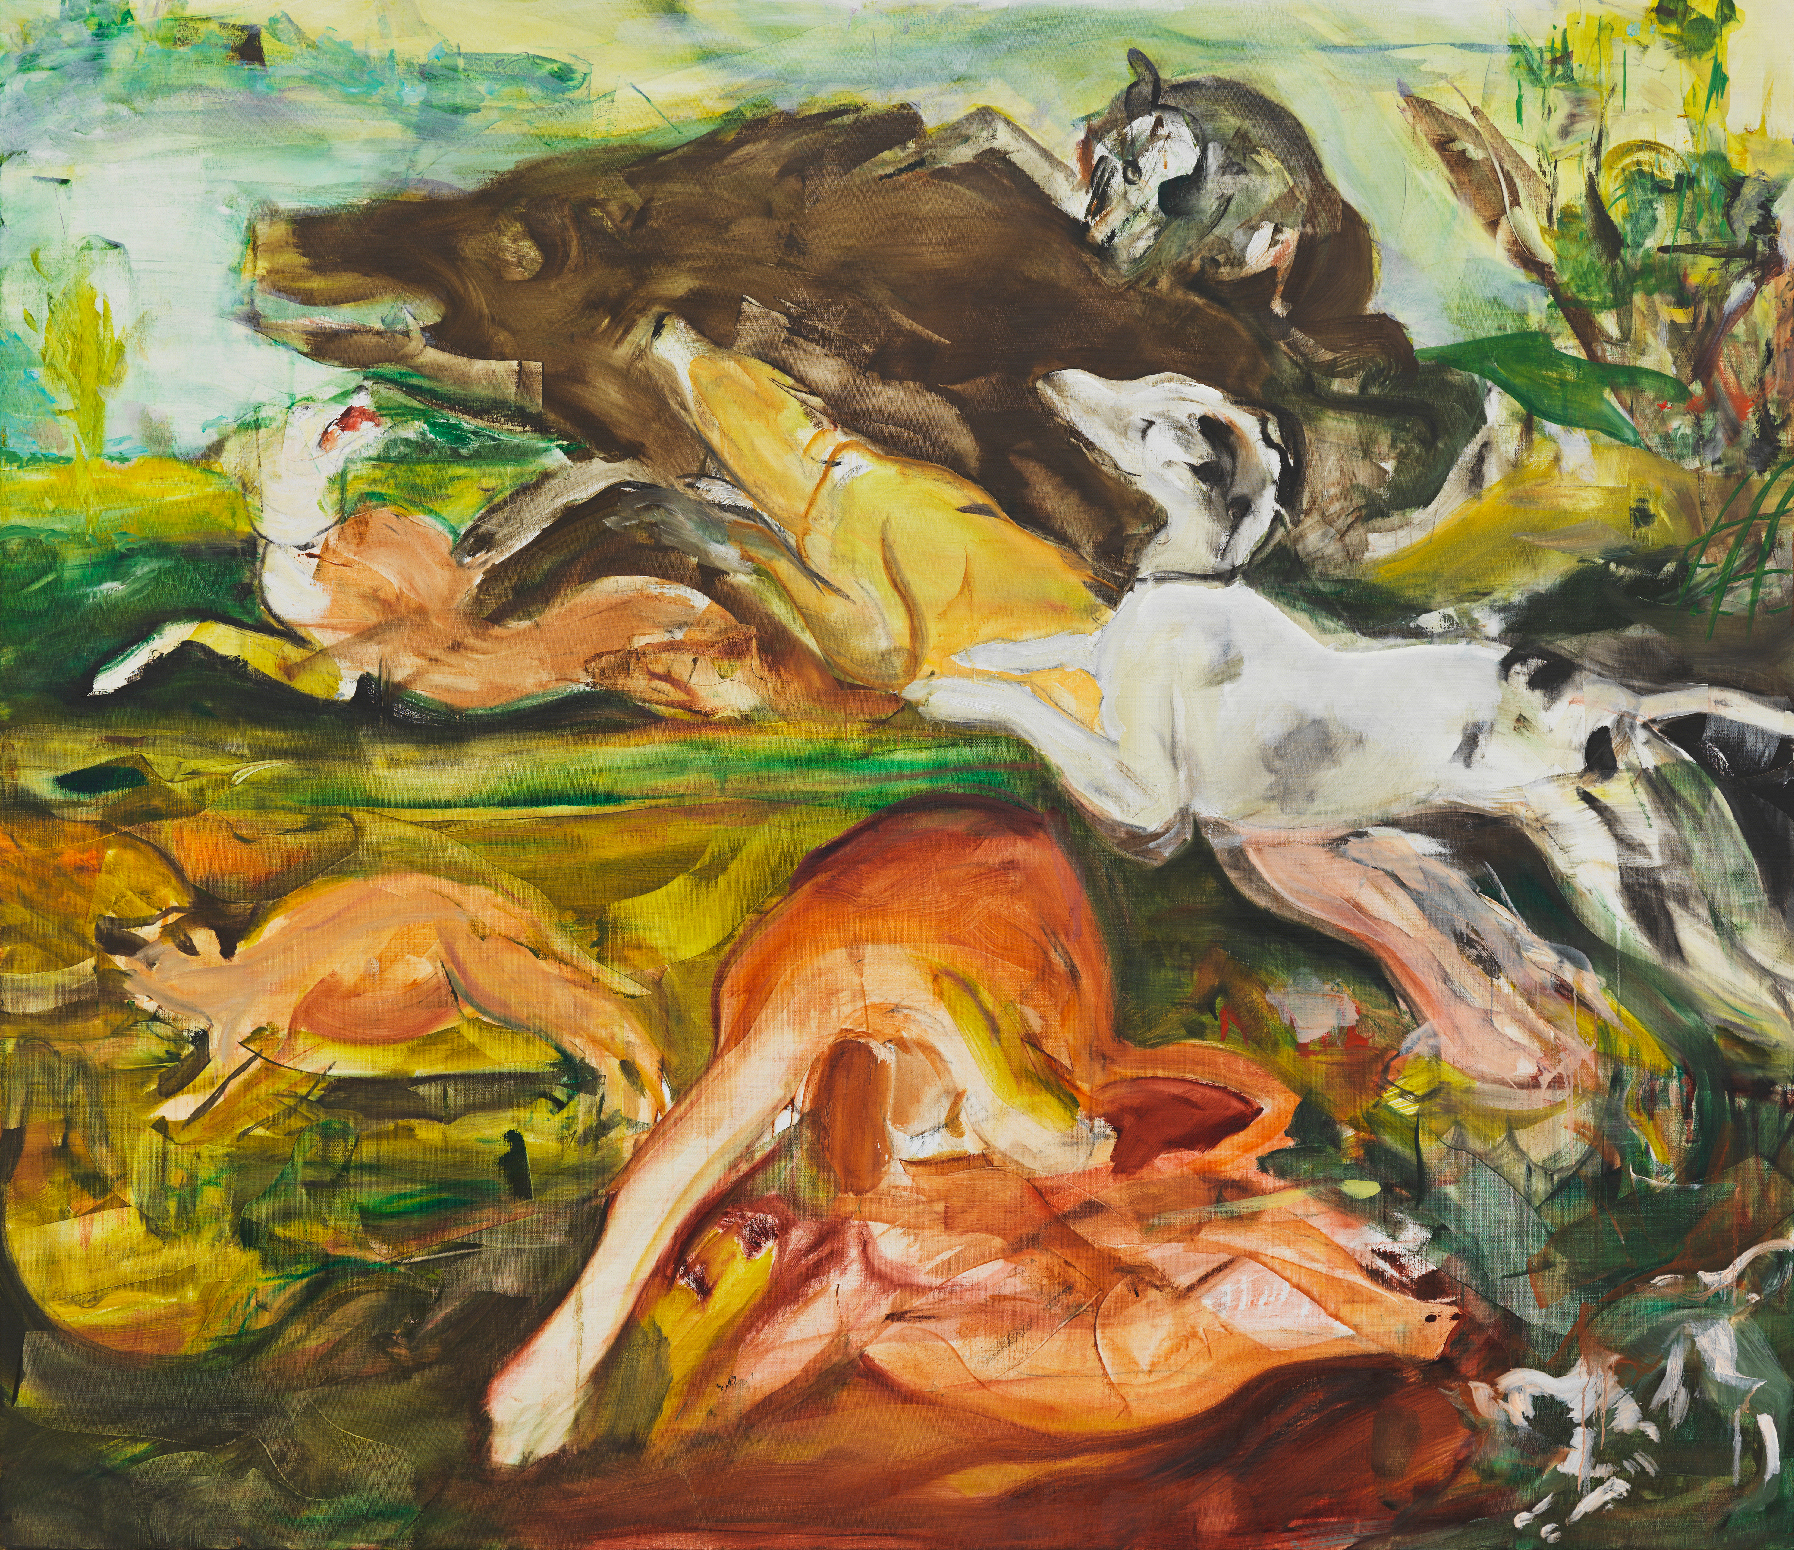 Cecily Brown, Hunt (after Frans Synders), 2019, oil on linen, 155 x 180 cm